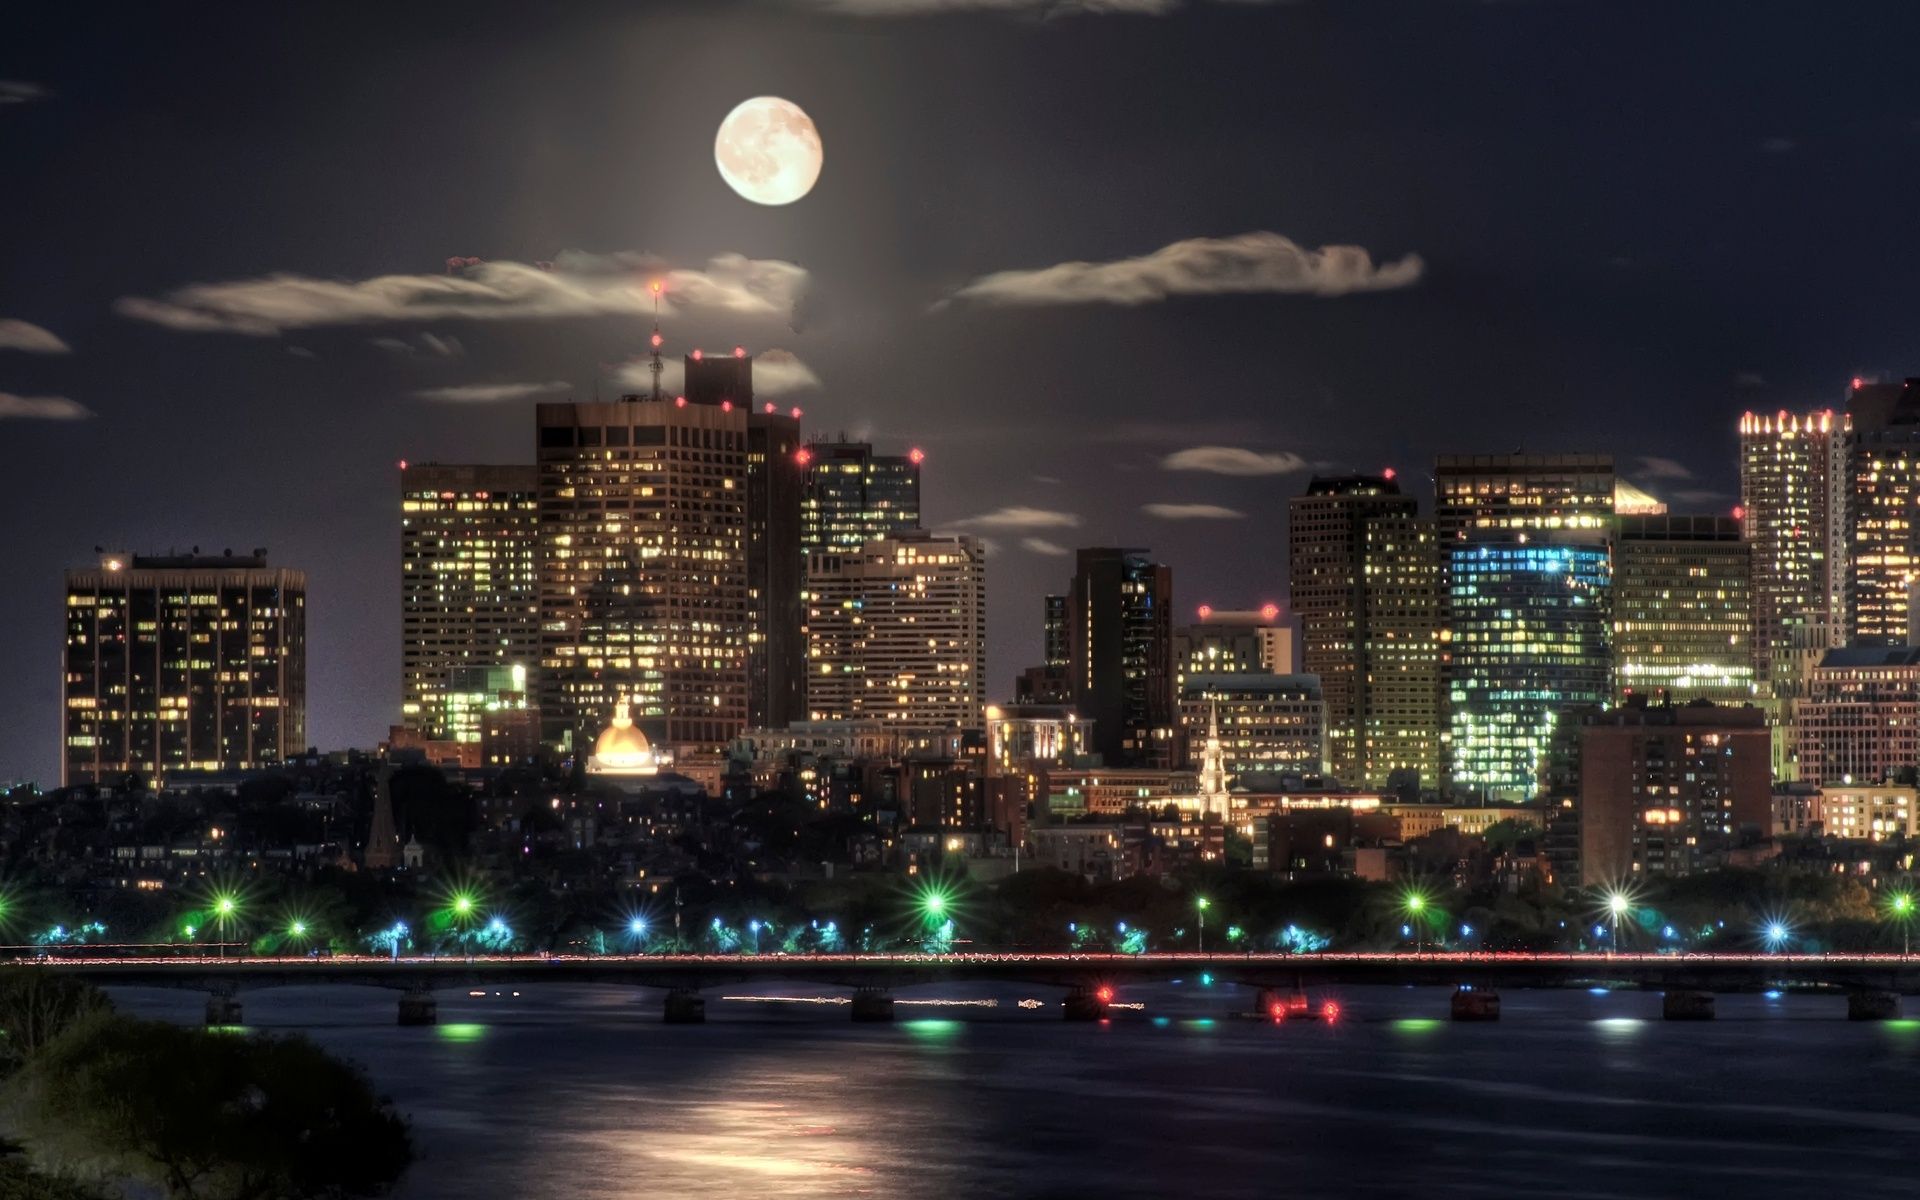 Artistic City In Moon Night Wallpapers